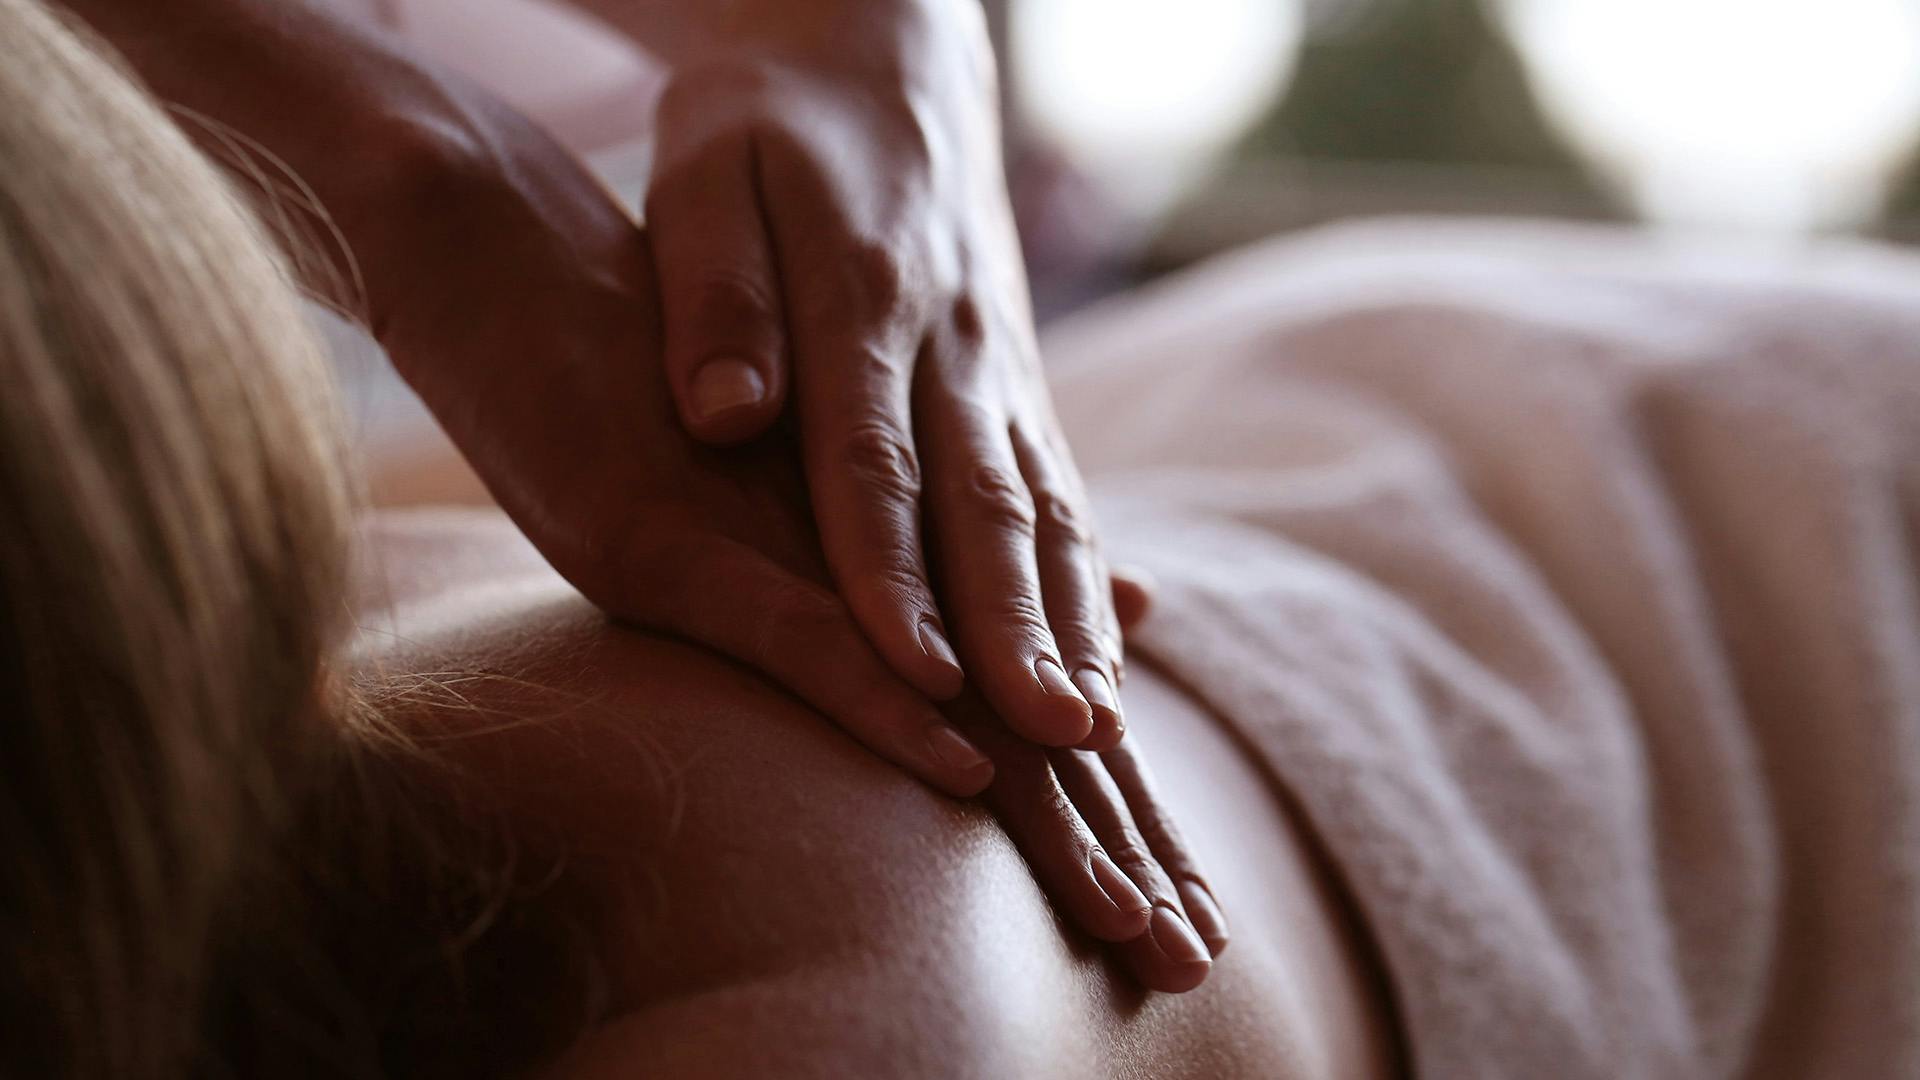 Close-up of hands applying pressure on a back during a massage